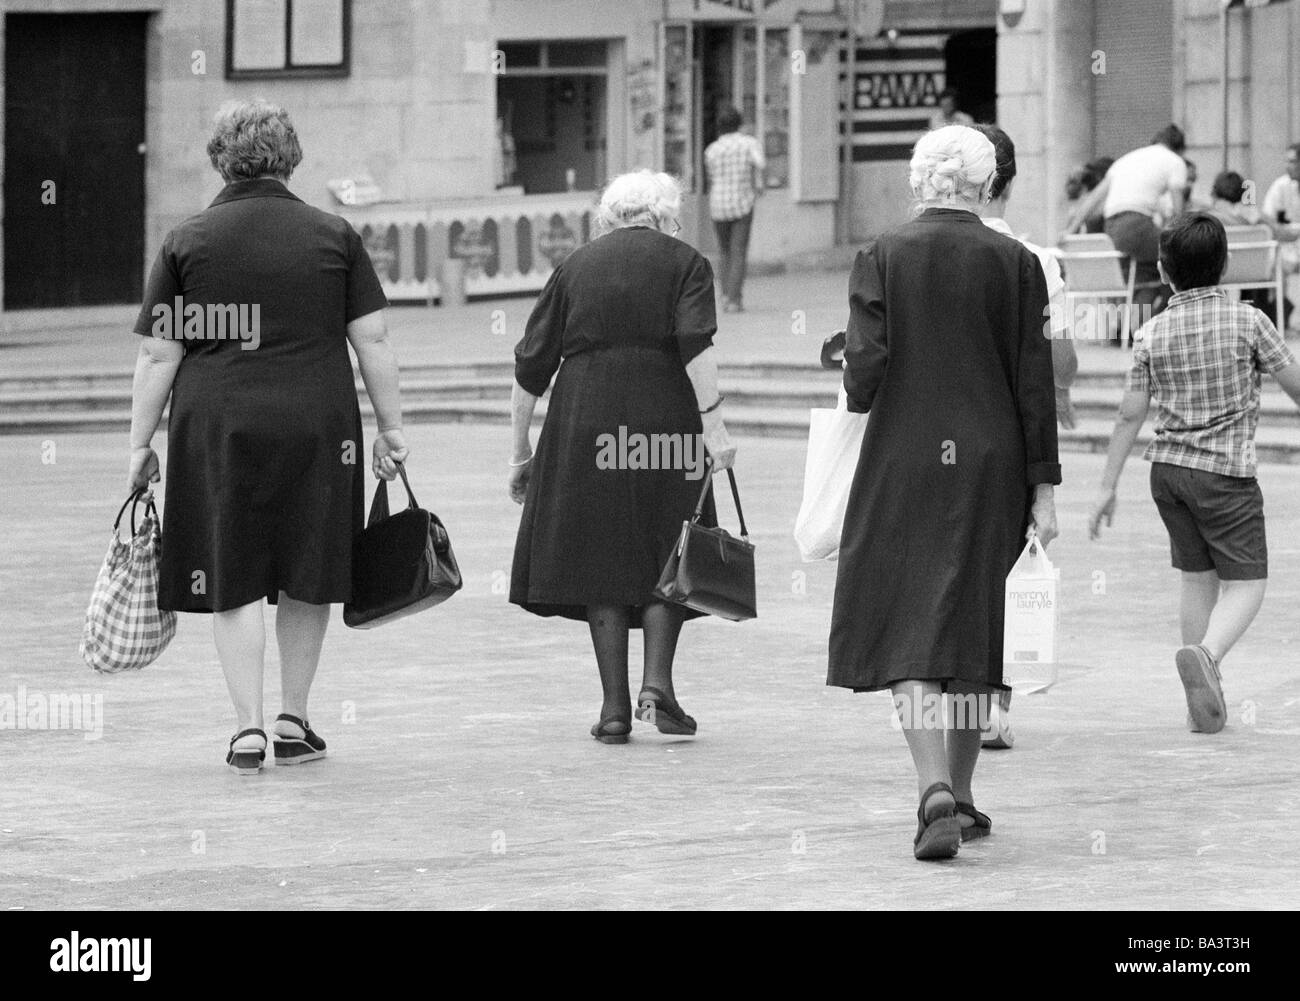 Seventies, black and white photo, people, older people, three older women completely dressed in black, shopping, shopping bags, hand bags, aged 60 to 70 years, Stock Photo